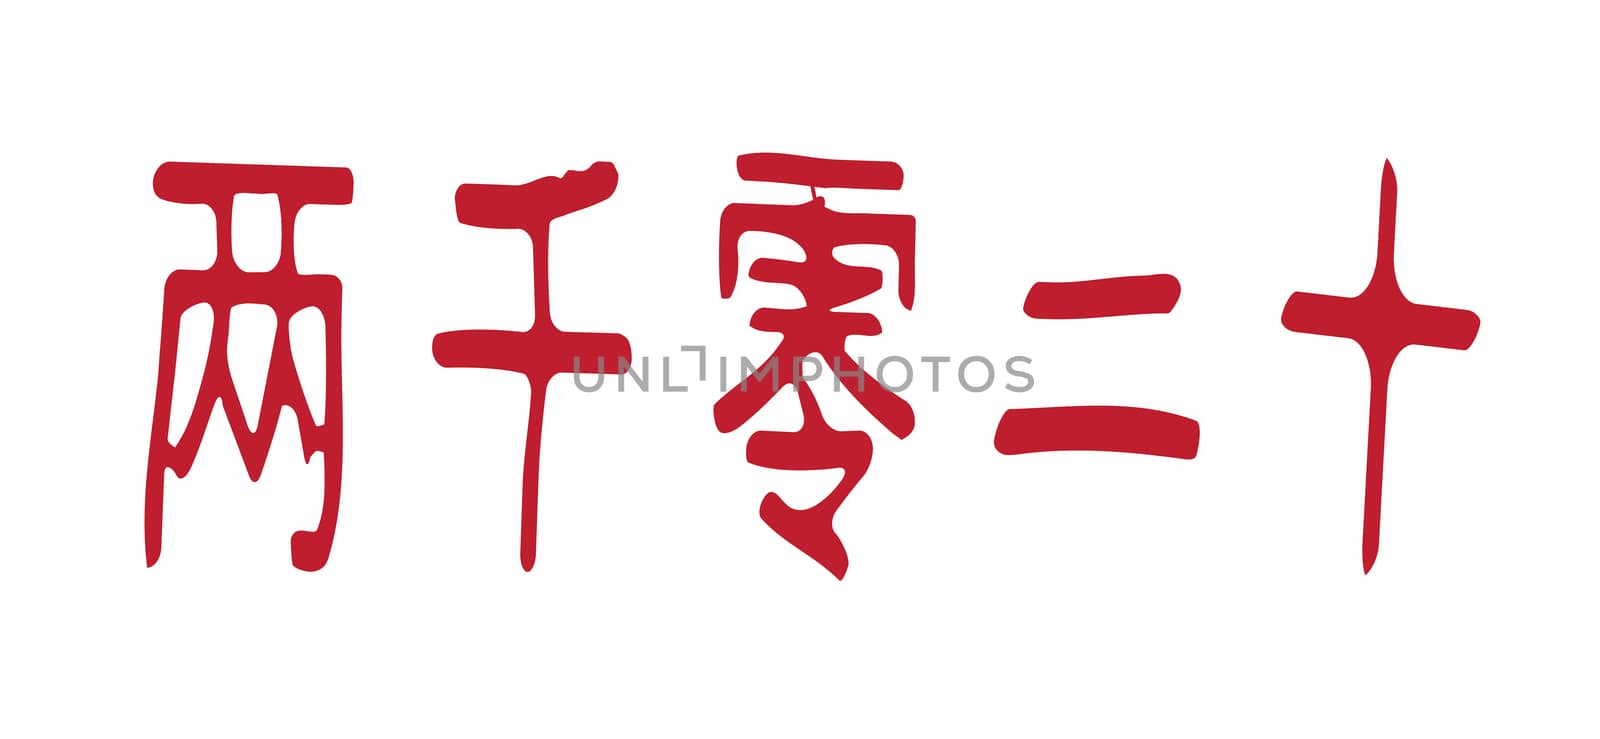 The Chinese Mandarine logogram for the year 2020 isolated on a white background